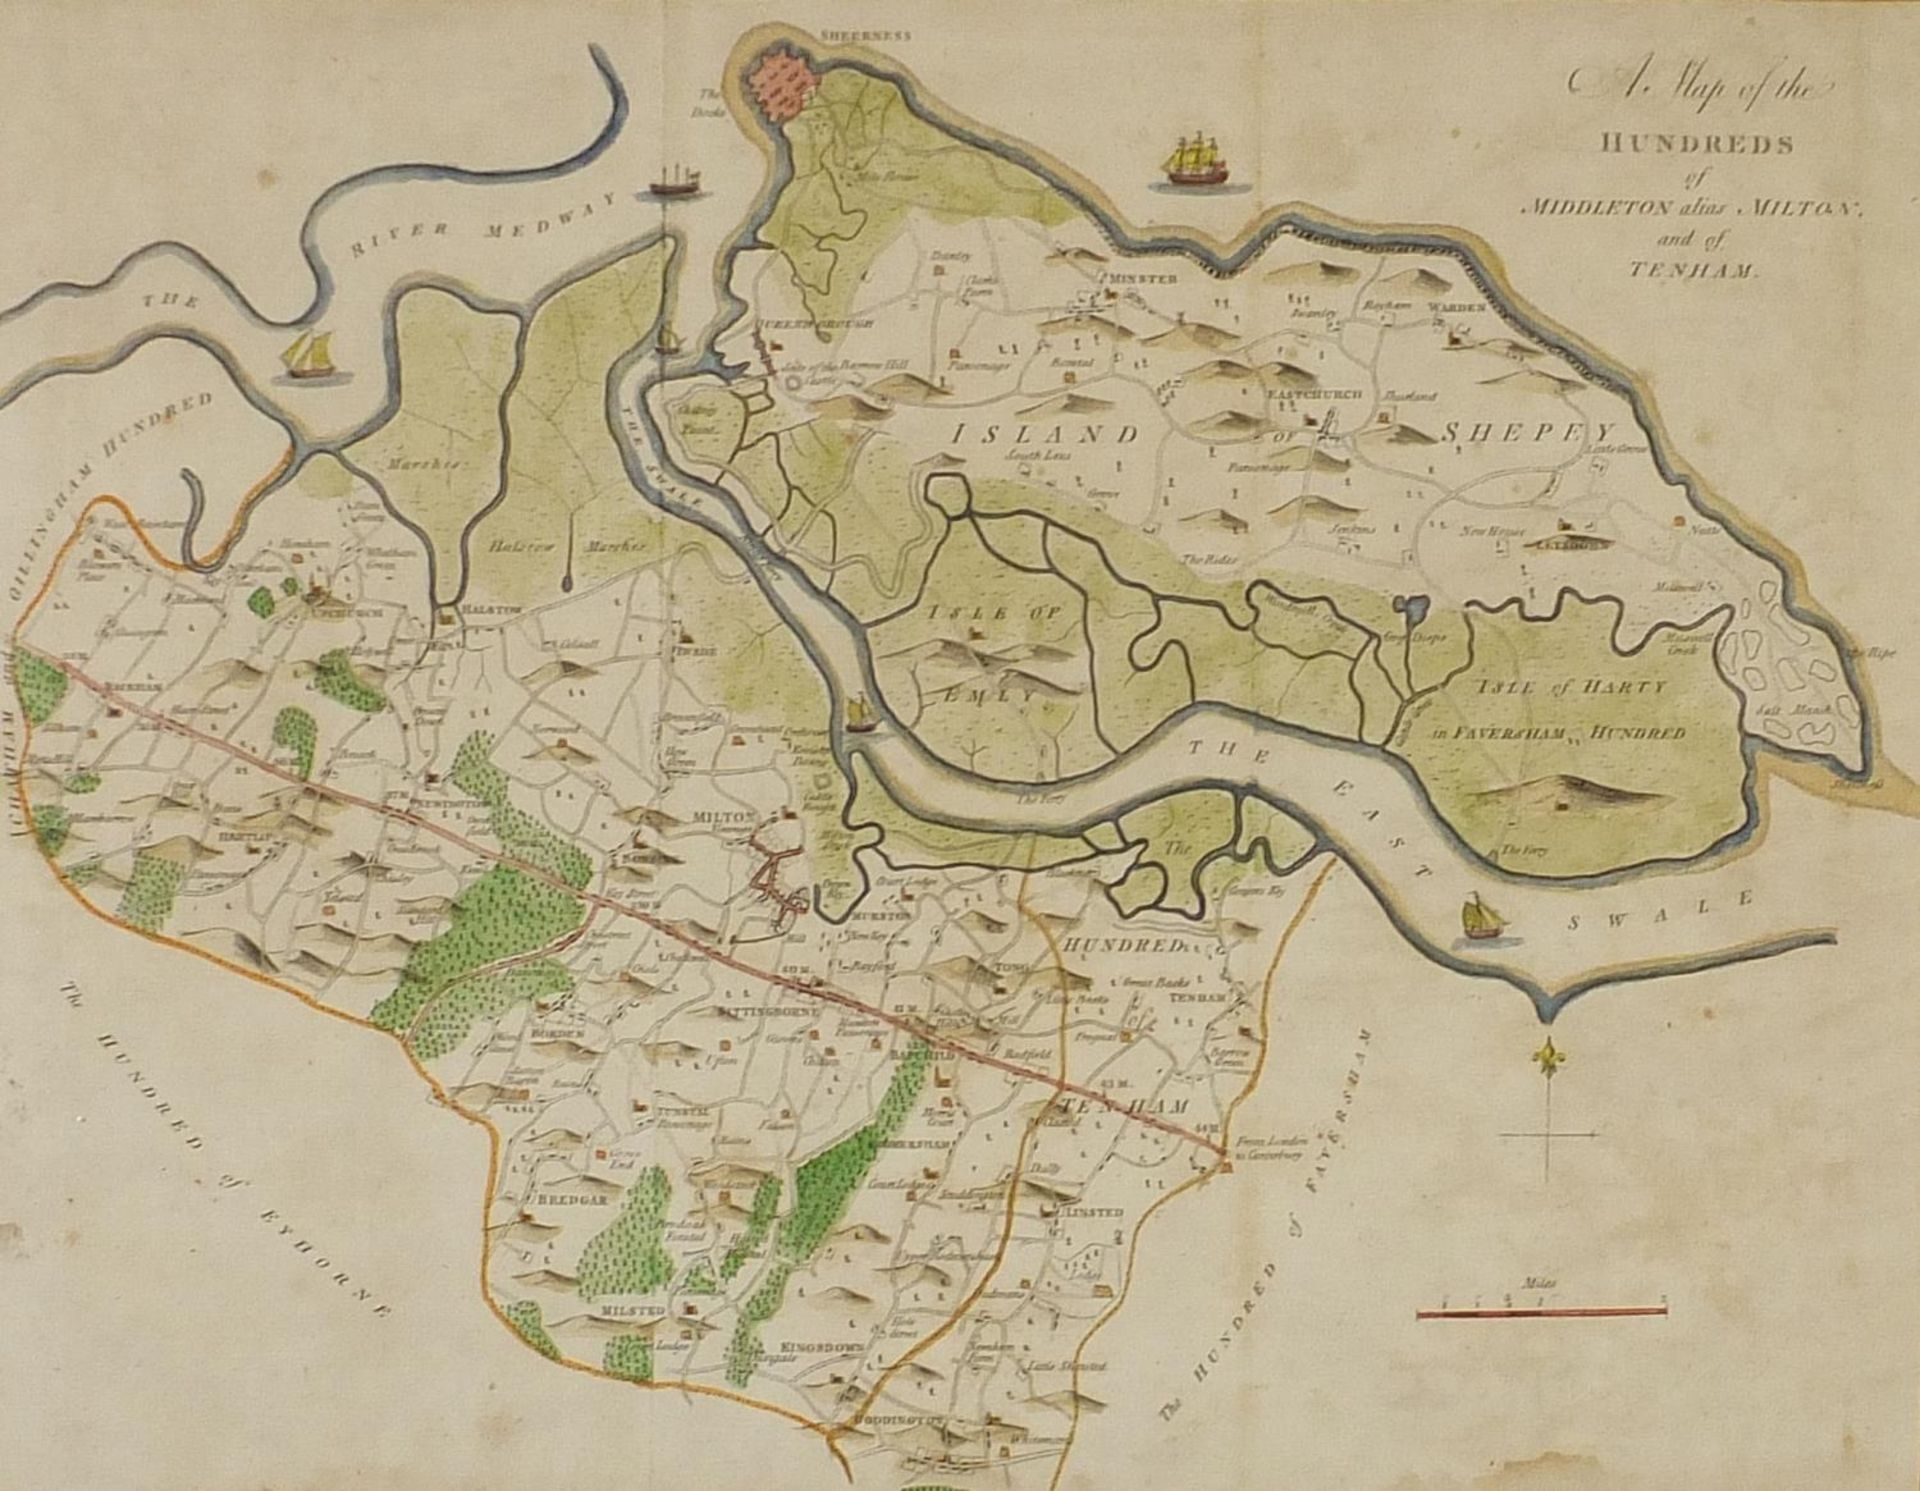 Three antique hand coloured maps comprising a map of the Hundred of Middleton alias Milton and of - Image 16 of 24